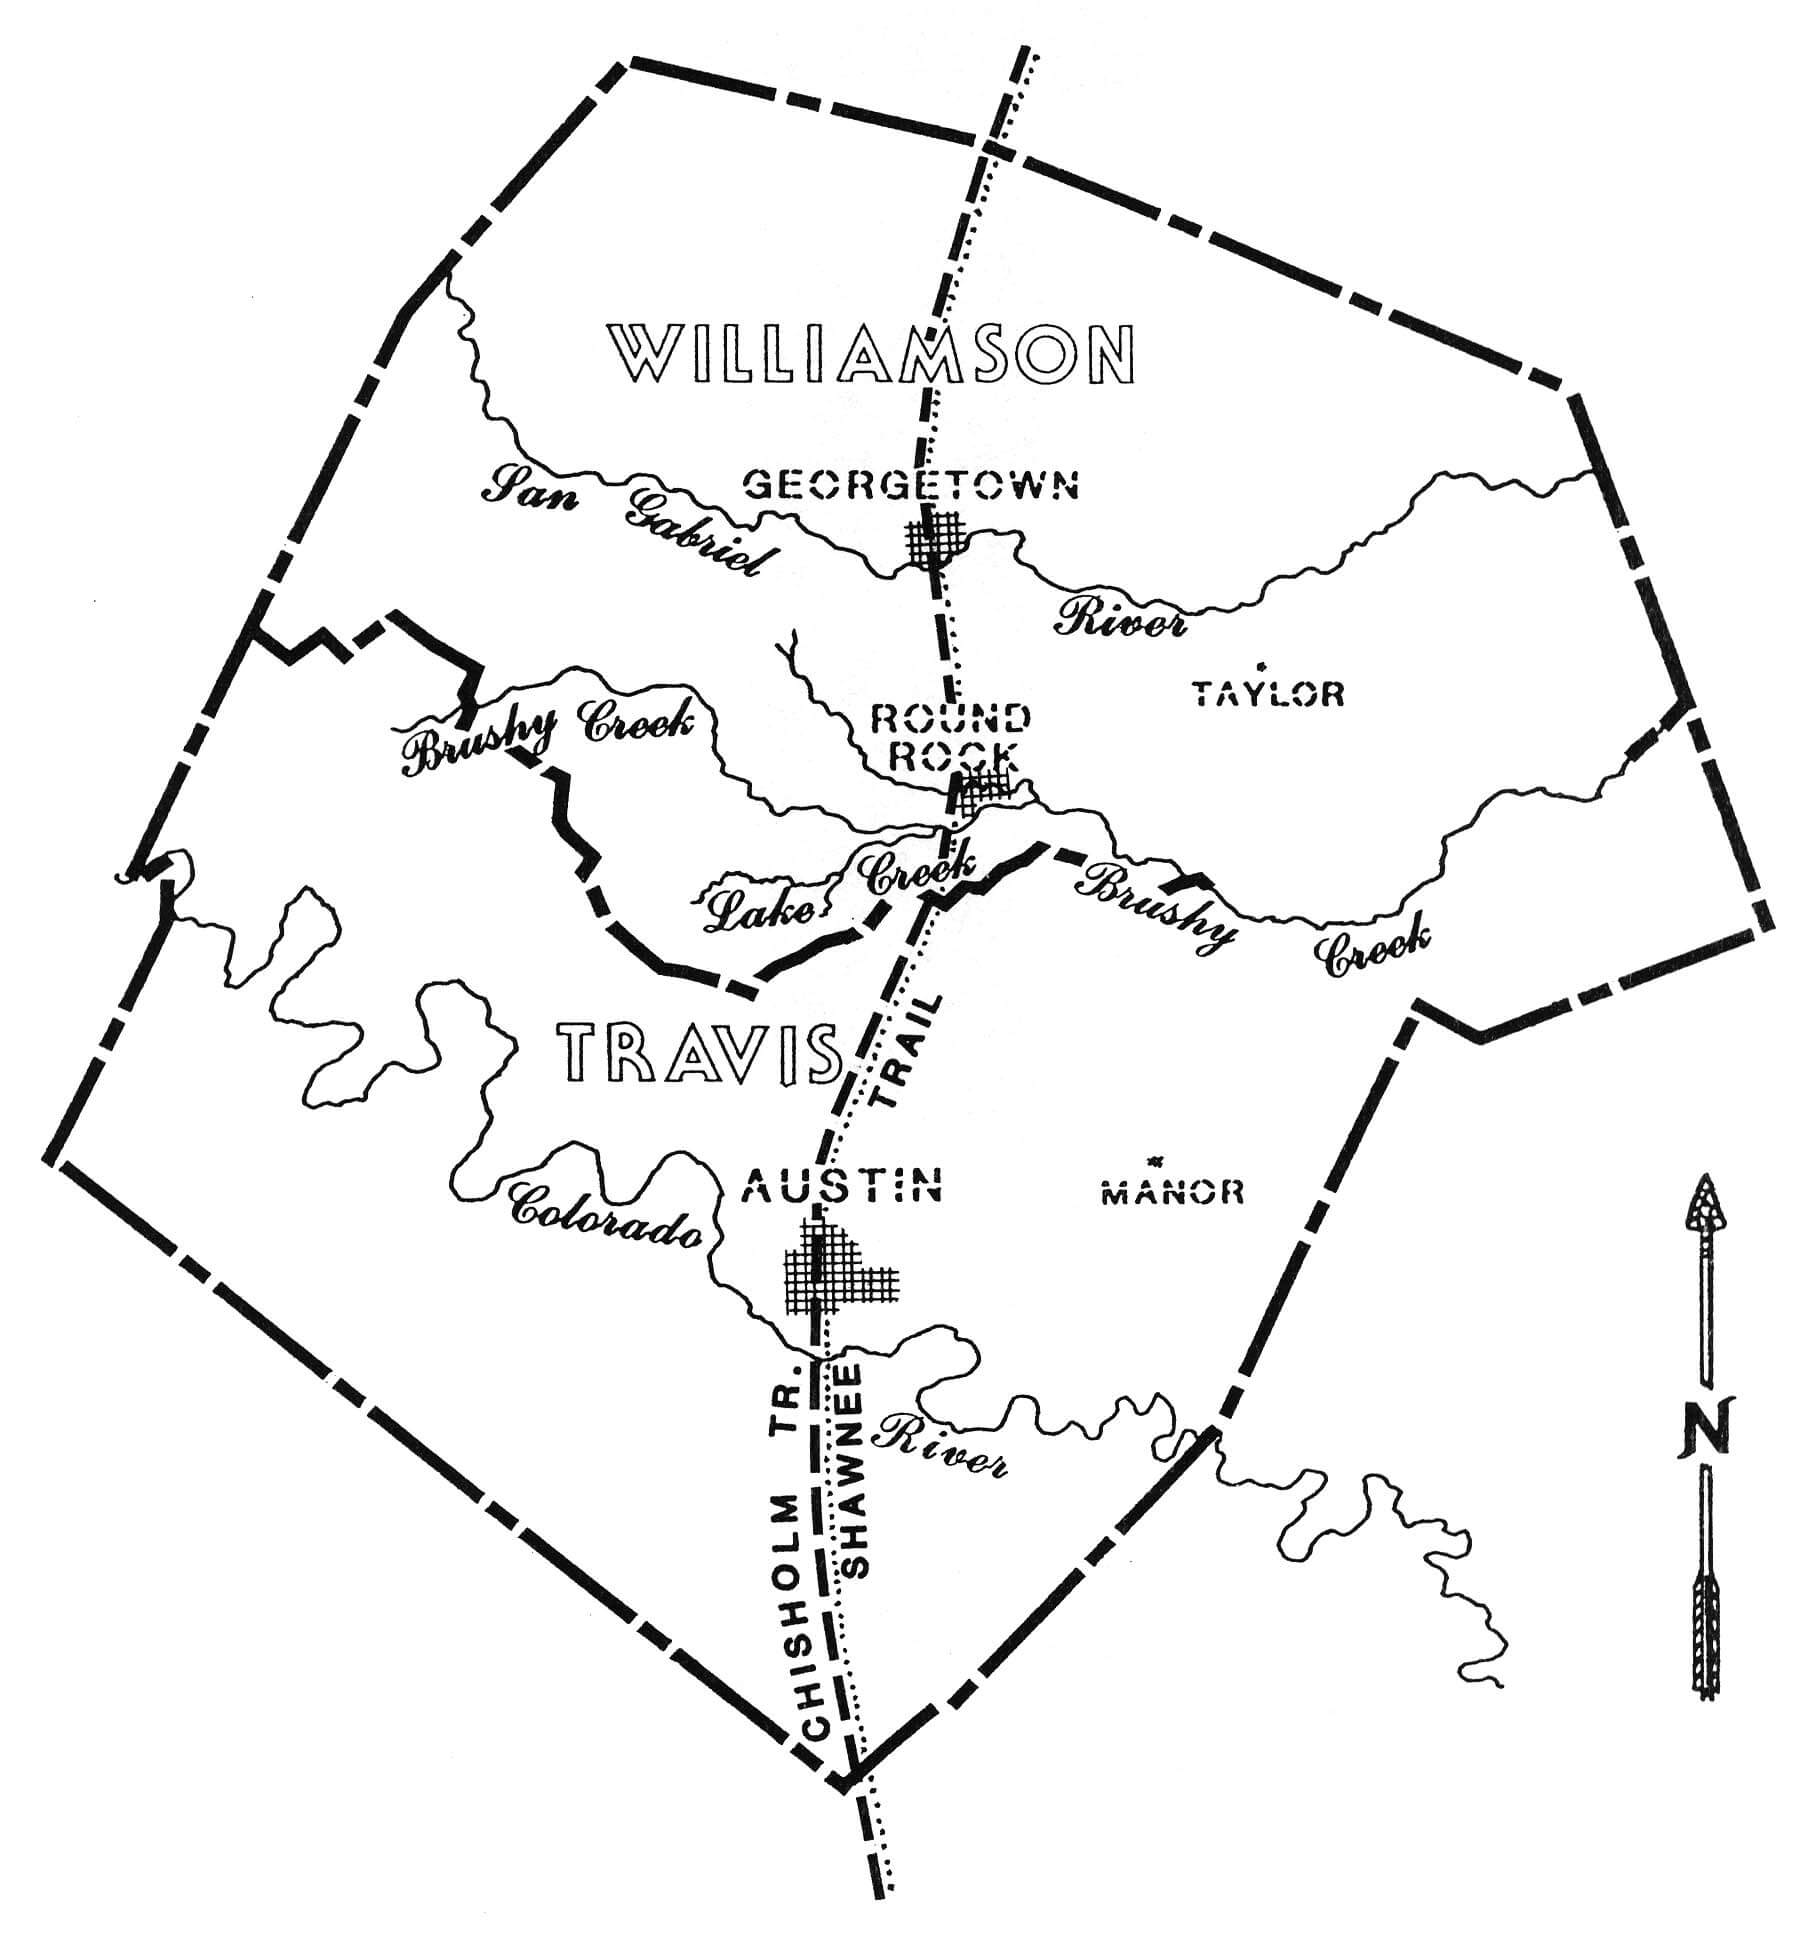 Route of the Chisholm Trail through Central Texas